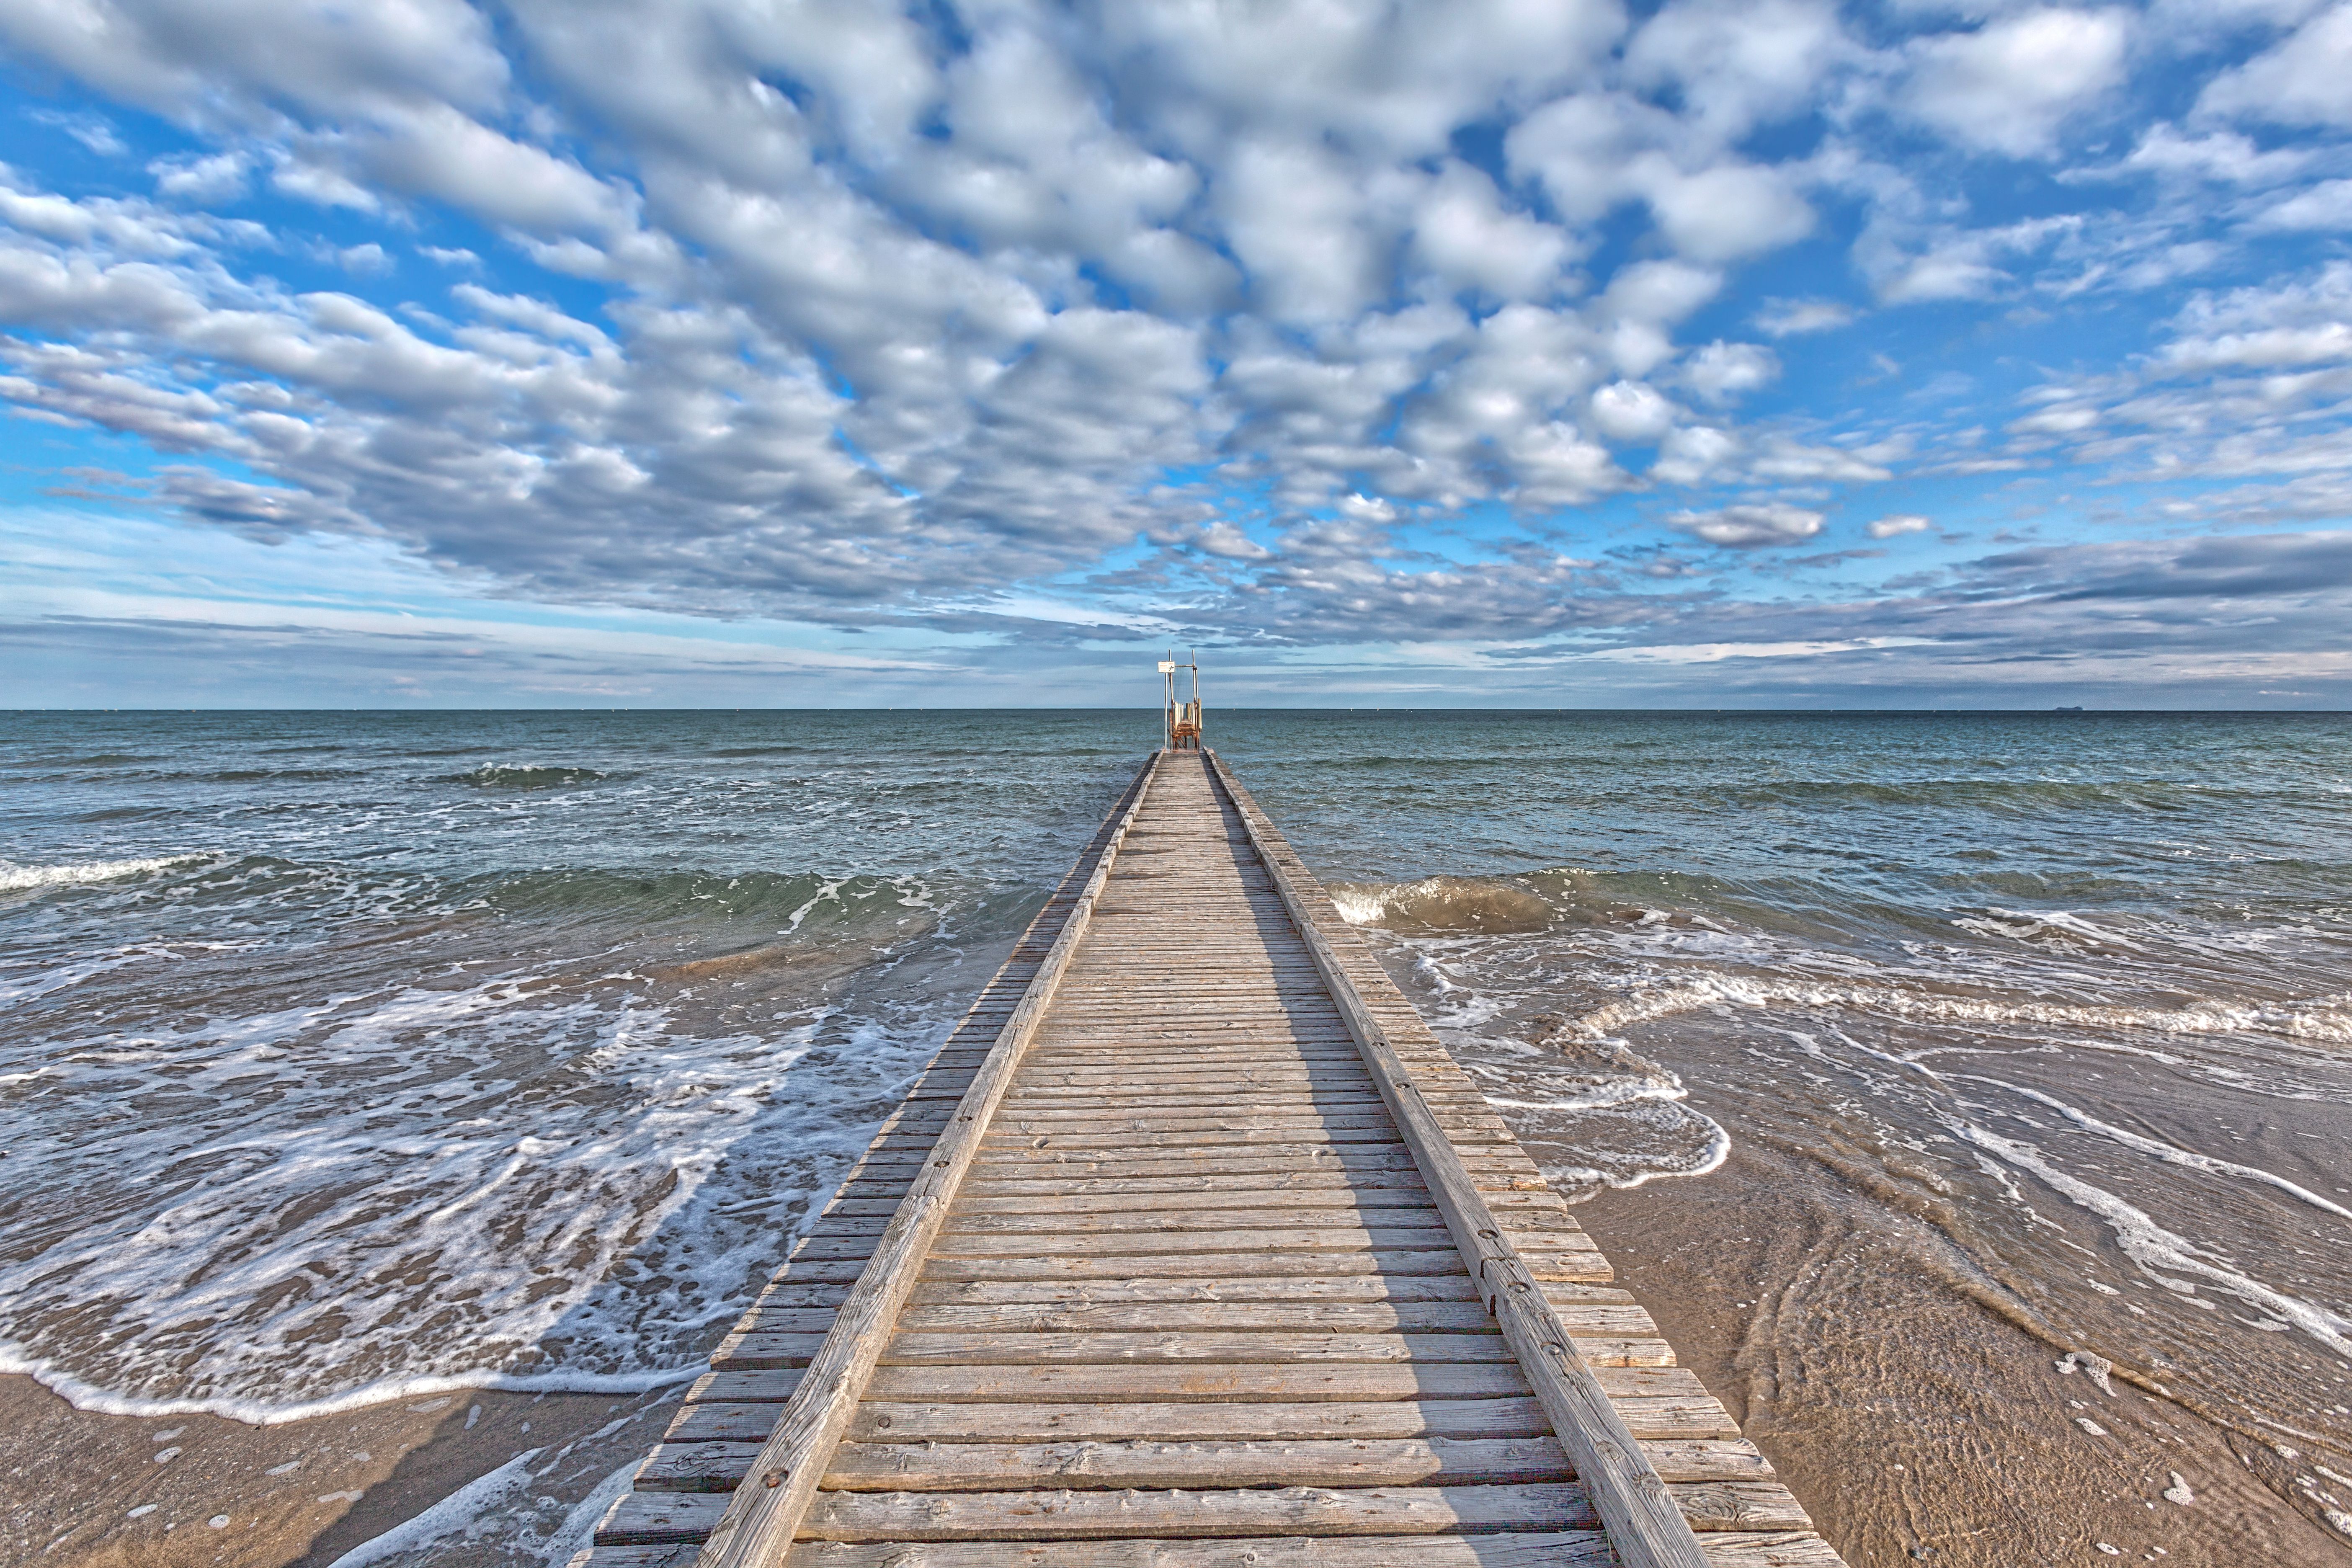 Long pier with sunbleached planks leads out into calm ocean waters.